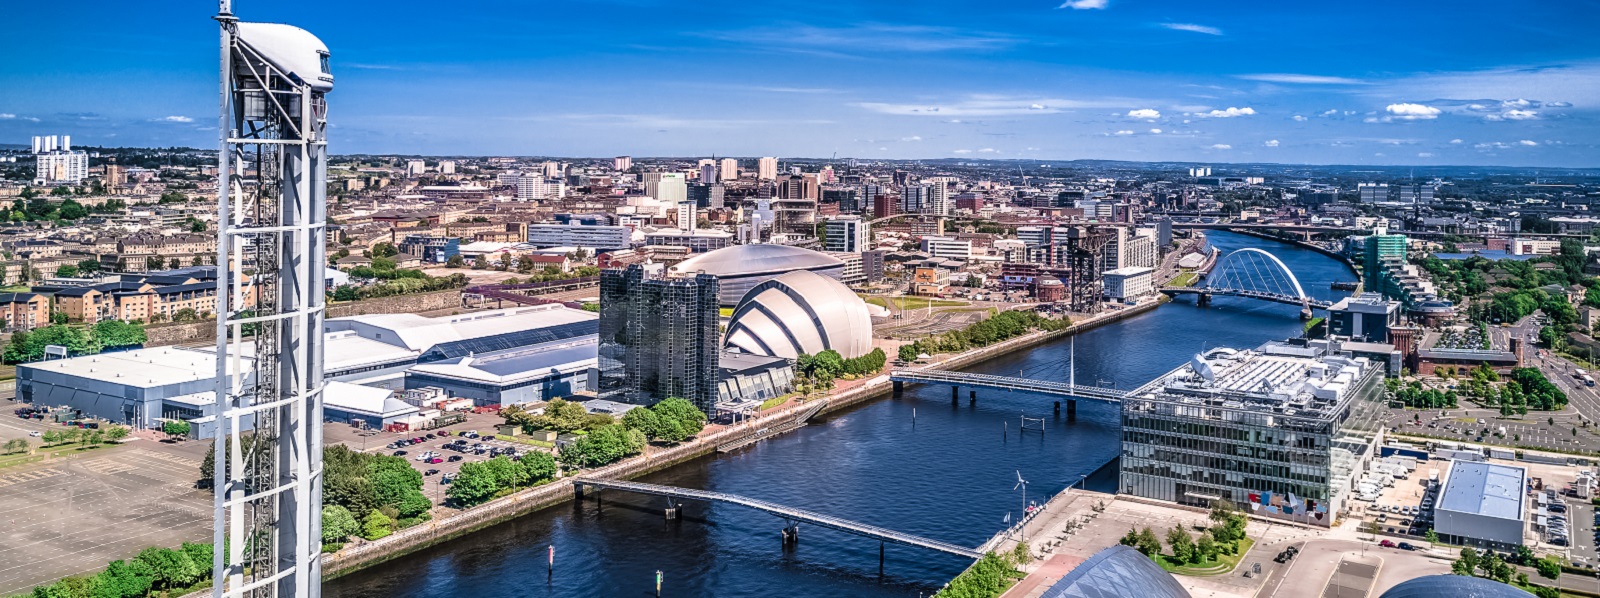 view of Glasgow's River Clyde